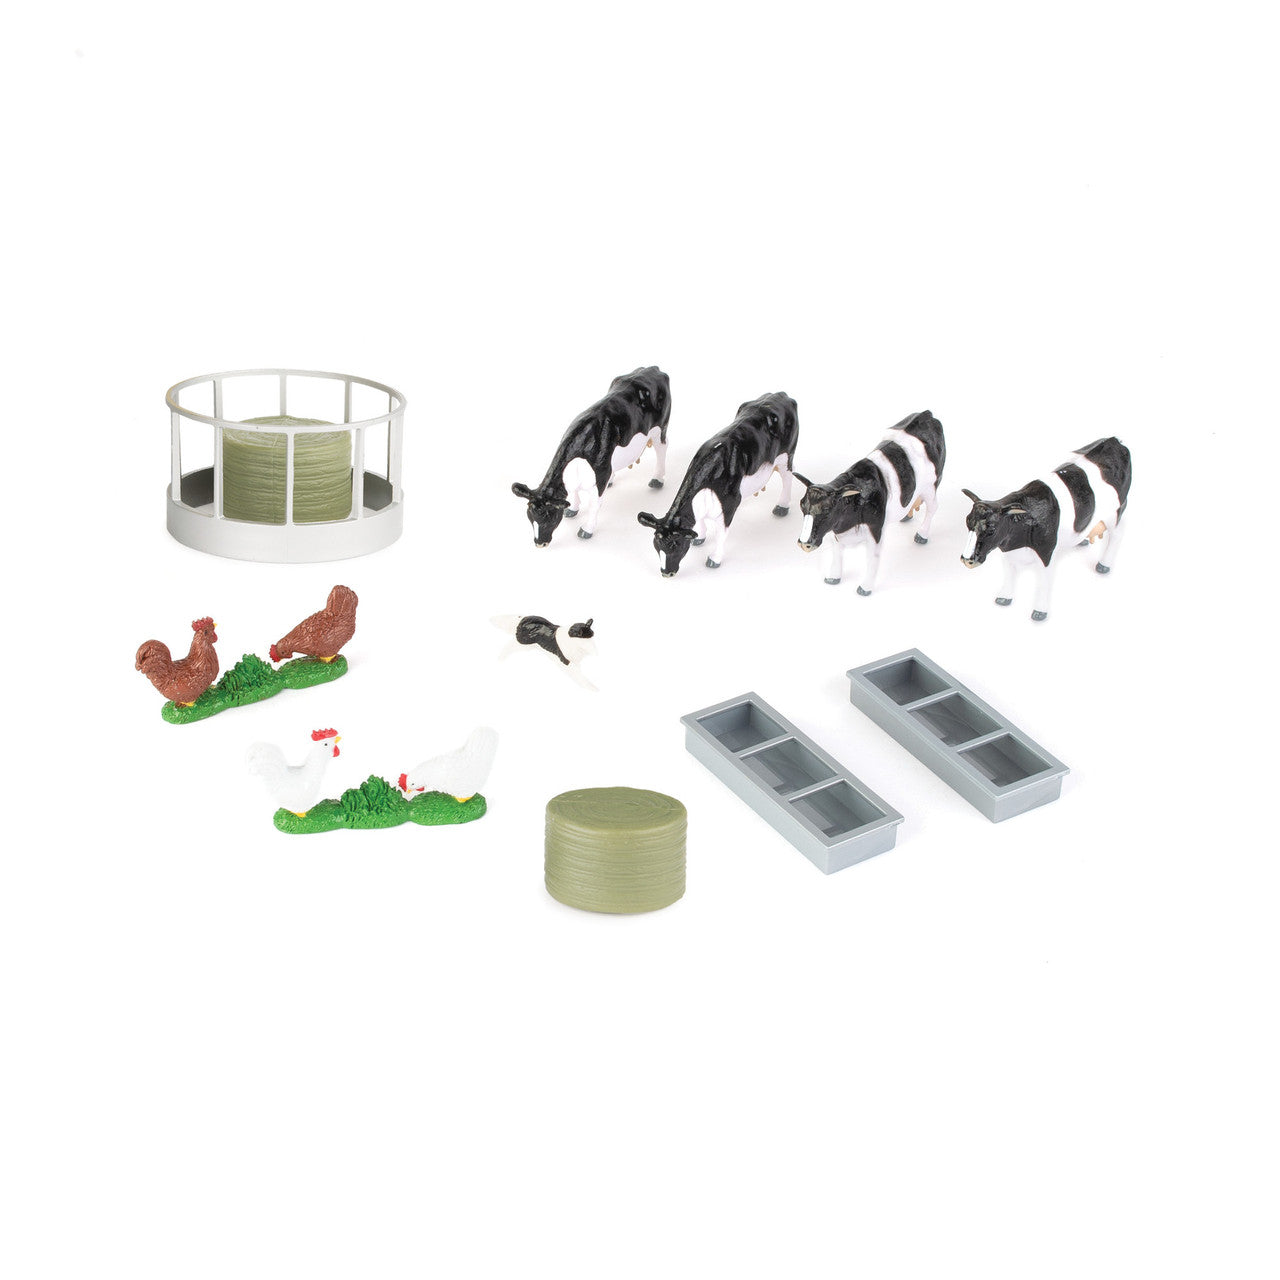 1:32 Livestock Building with Case Skid Loader and Accessories